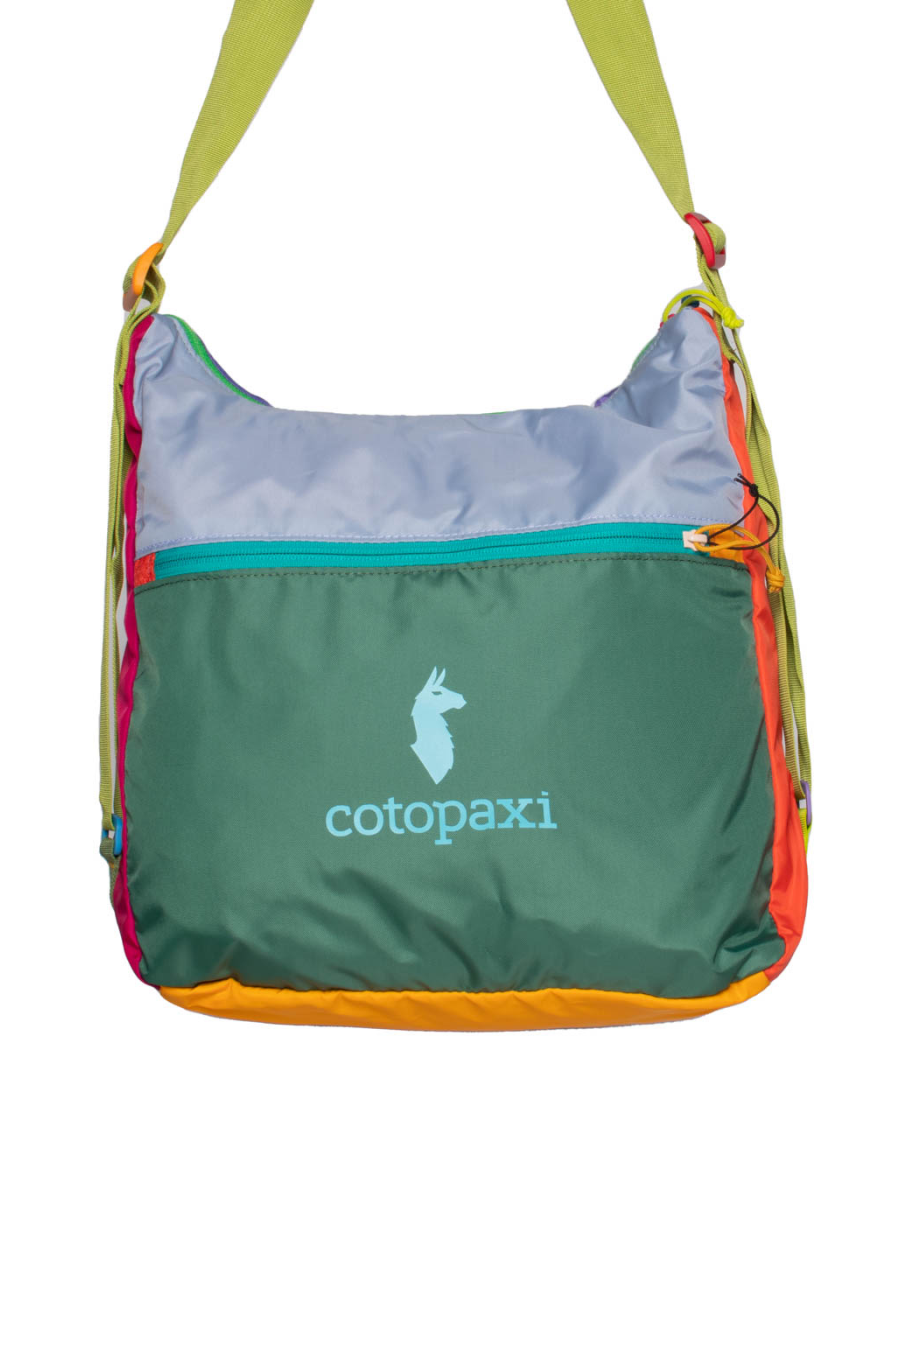 Cotopaxi Taal Convertible Tote – The Trail Shop